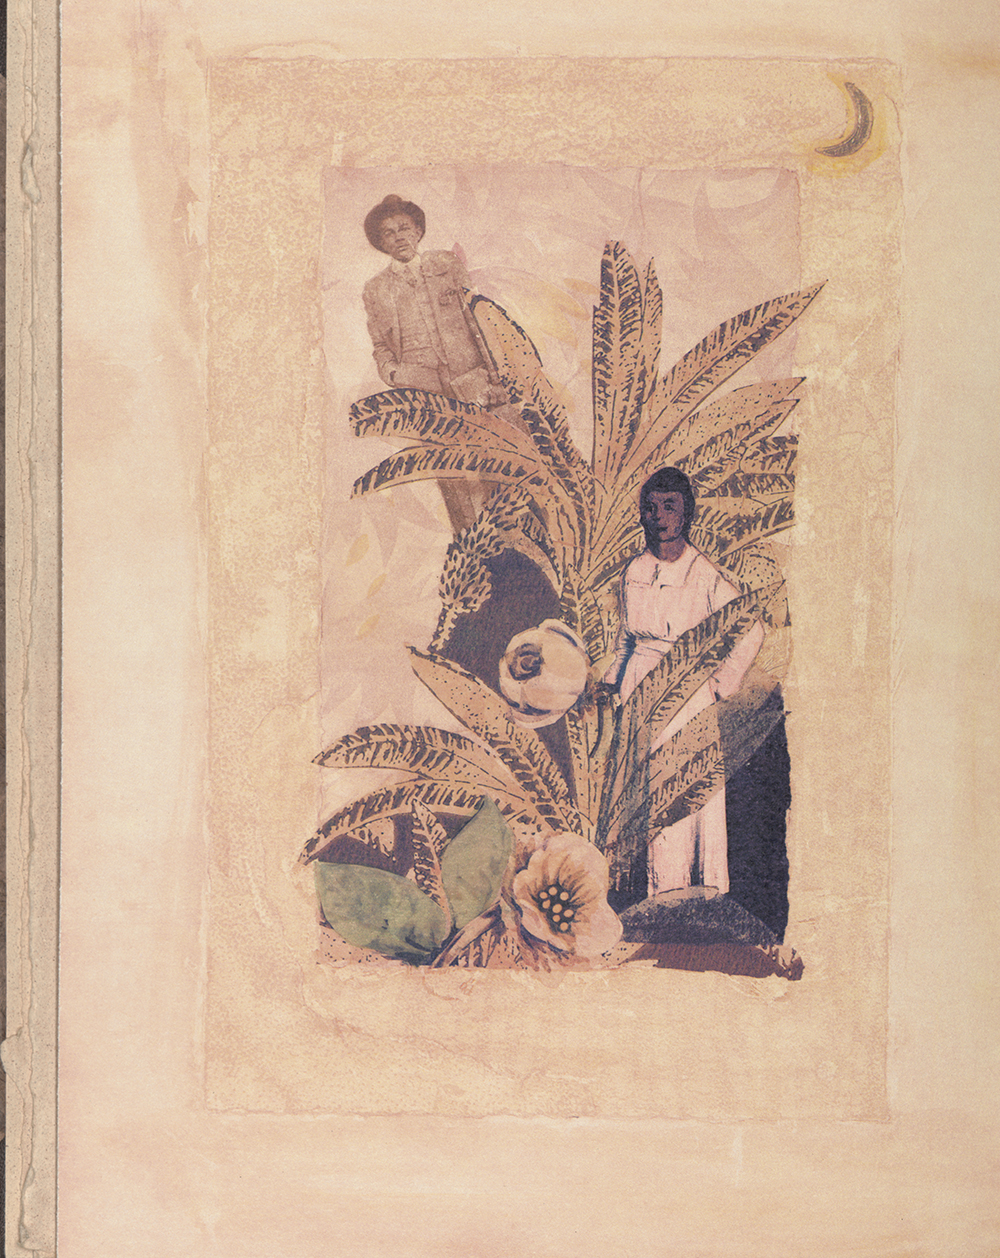 Printed collage of two Black men sprouting from plant foliage, stalks of wheat, and two blooming flowers